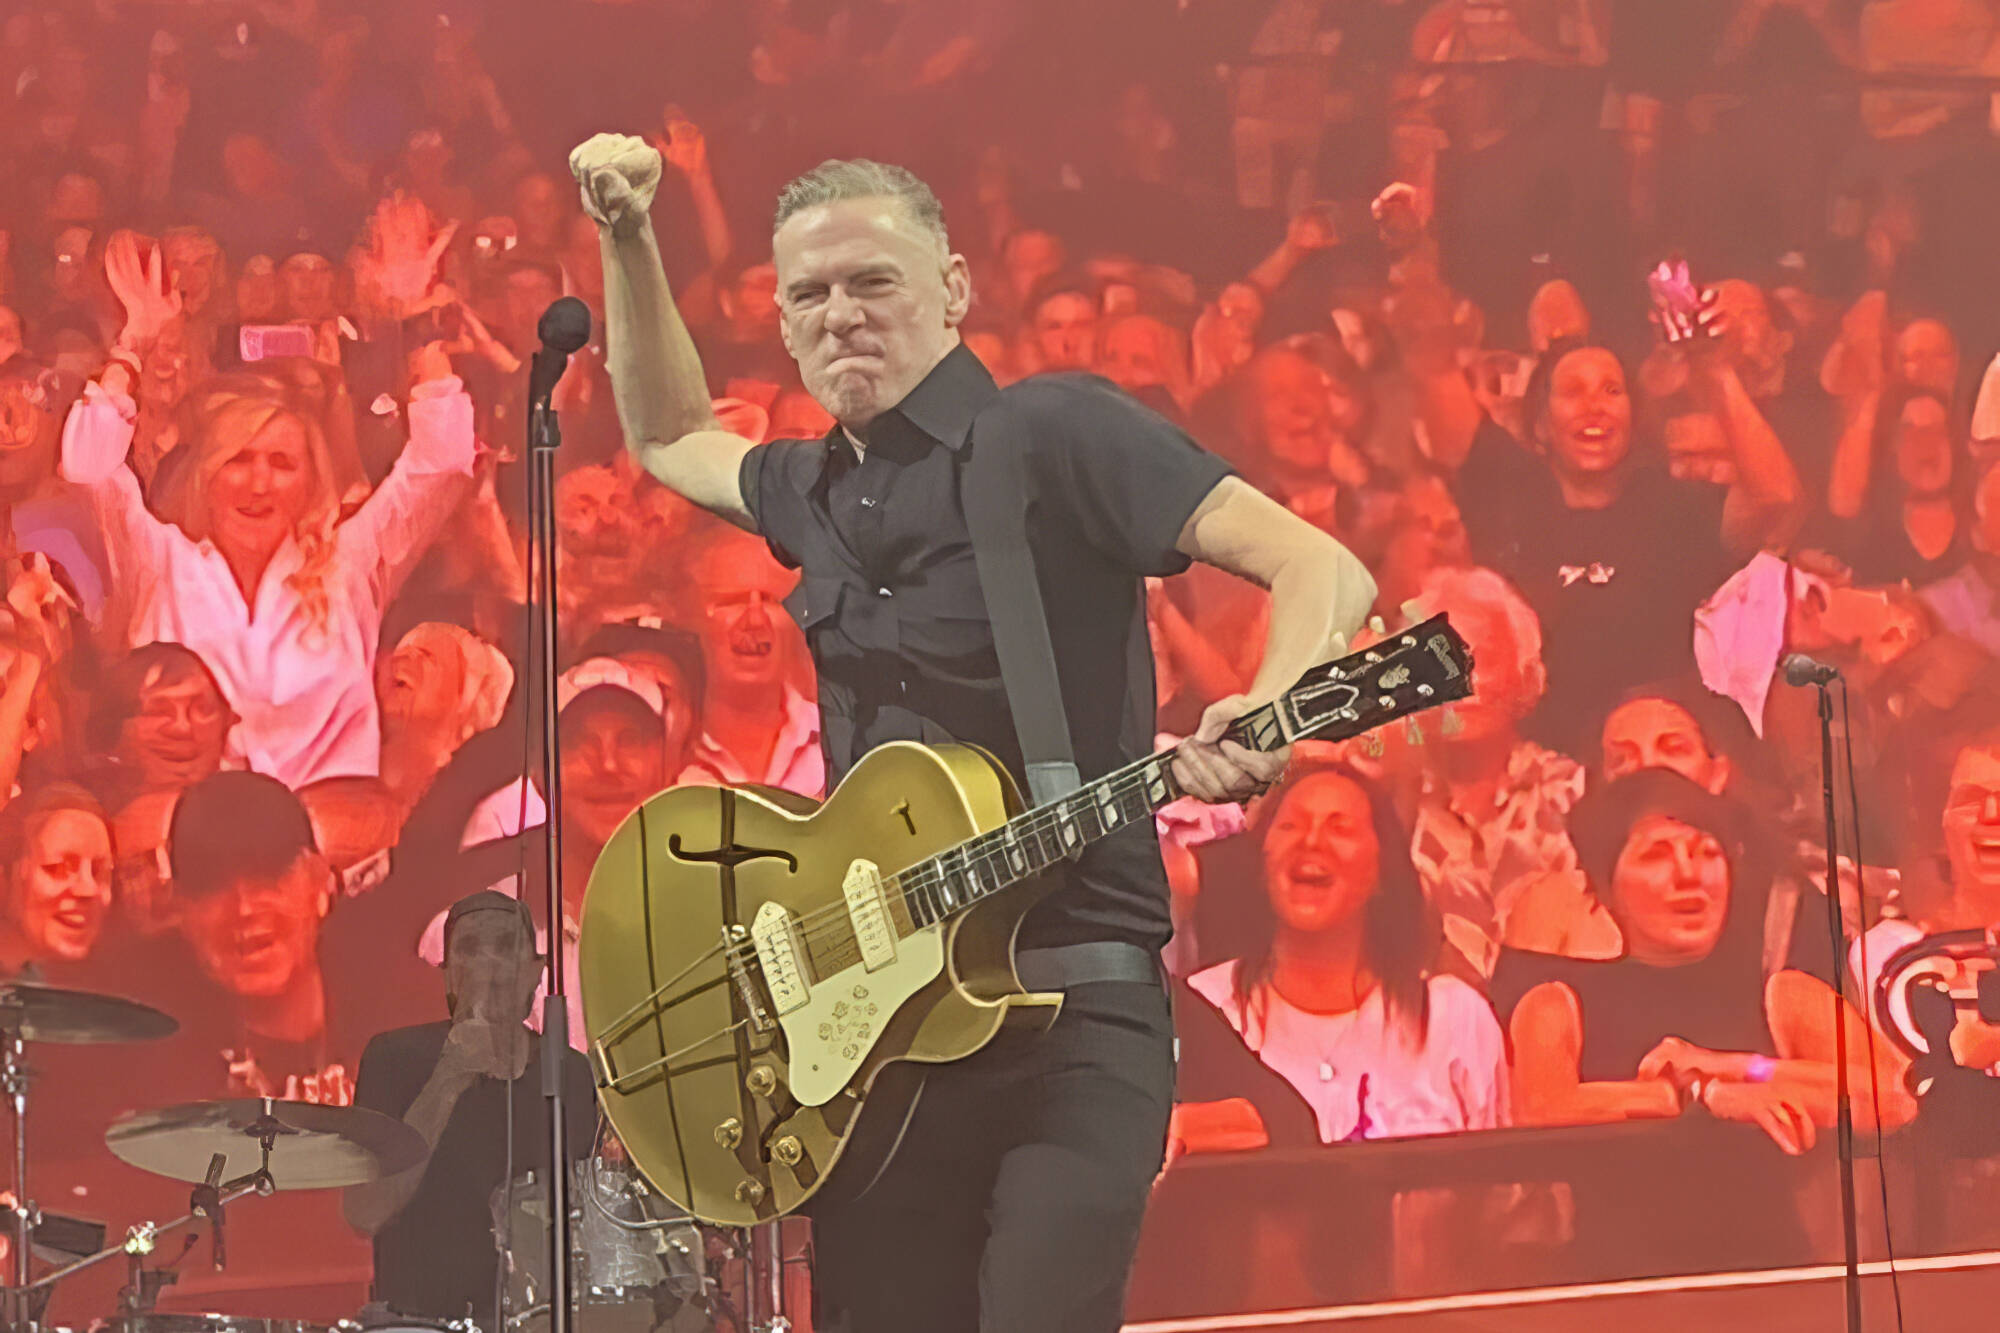 Bryan Adams rocks his sold out show in Penticton where an appreciative audience enjoyed every minute of it. (Andrea DeMeer)